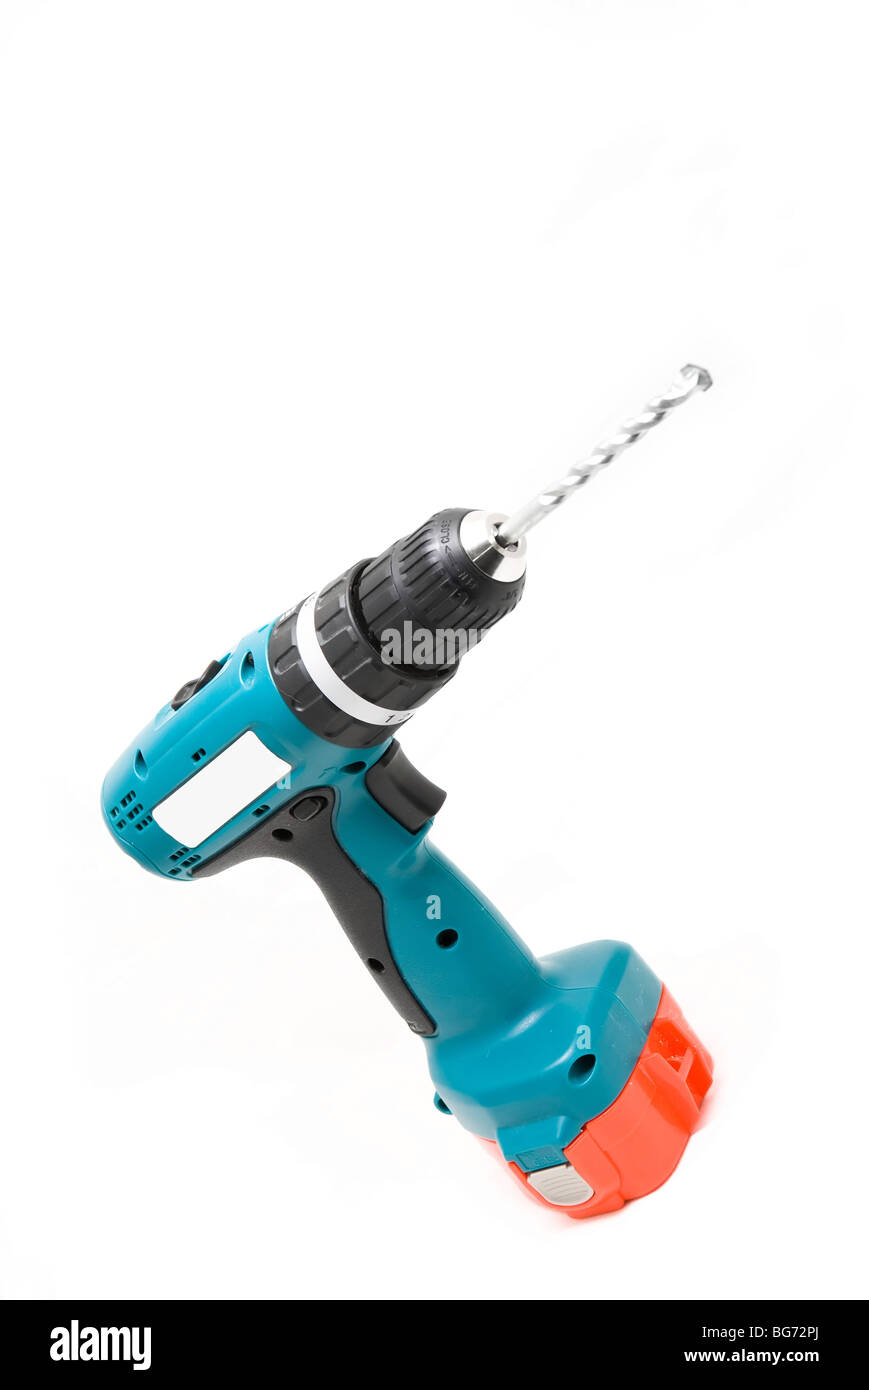 Battery-powered hand drill on the white background Stock Photo